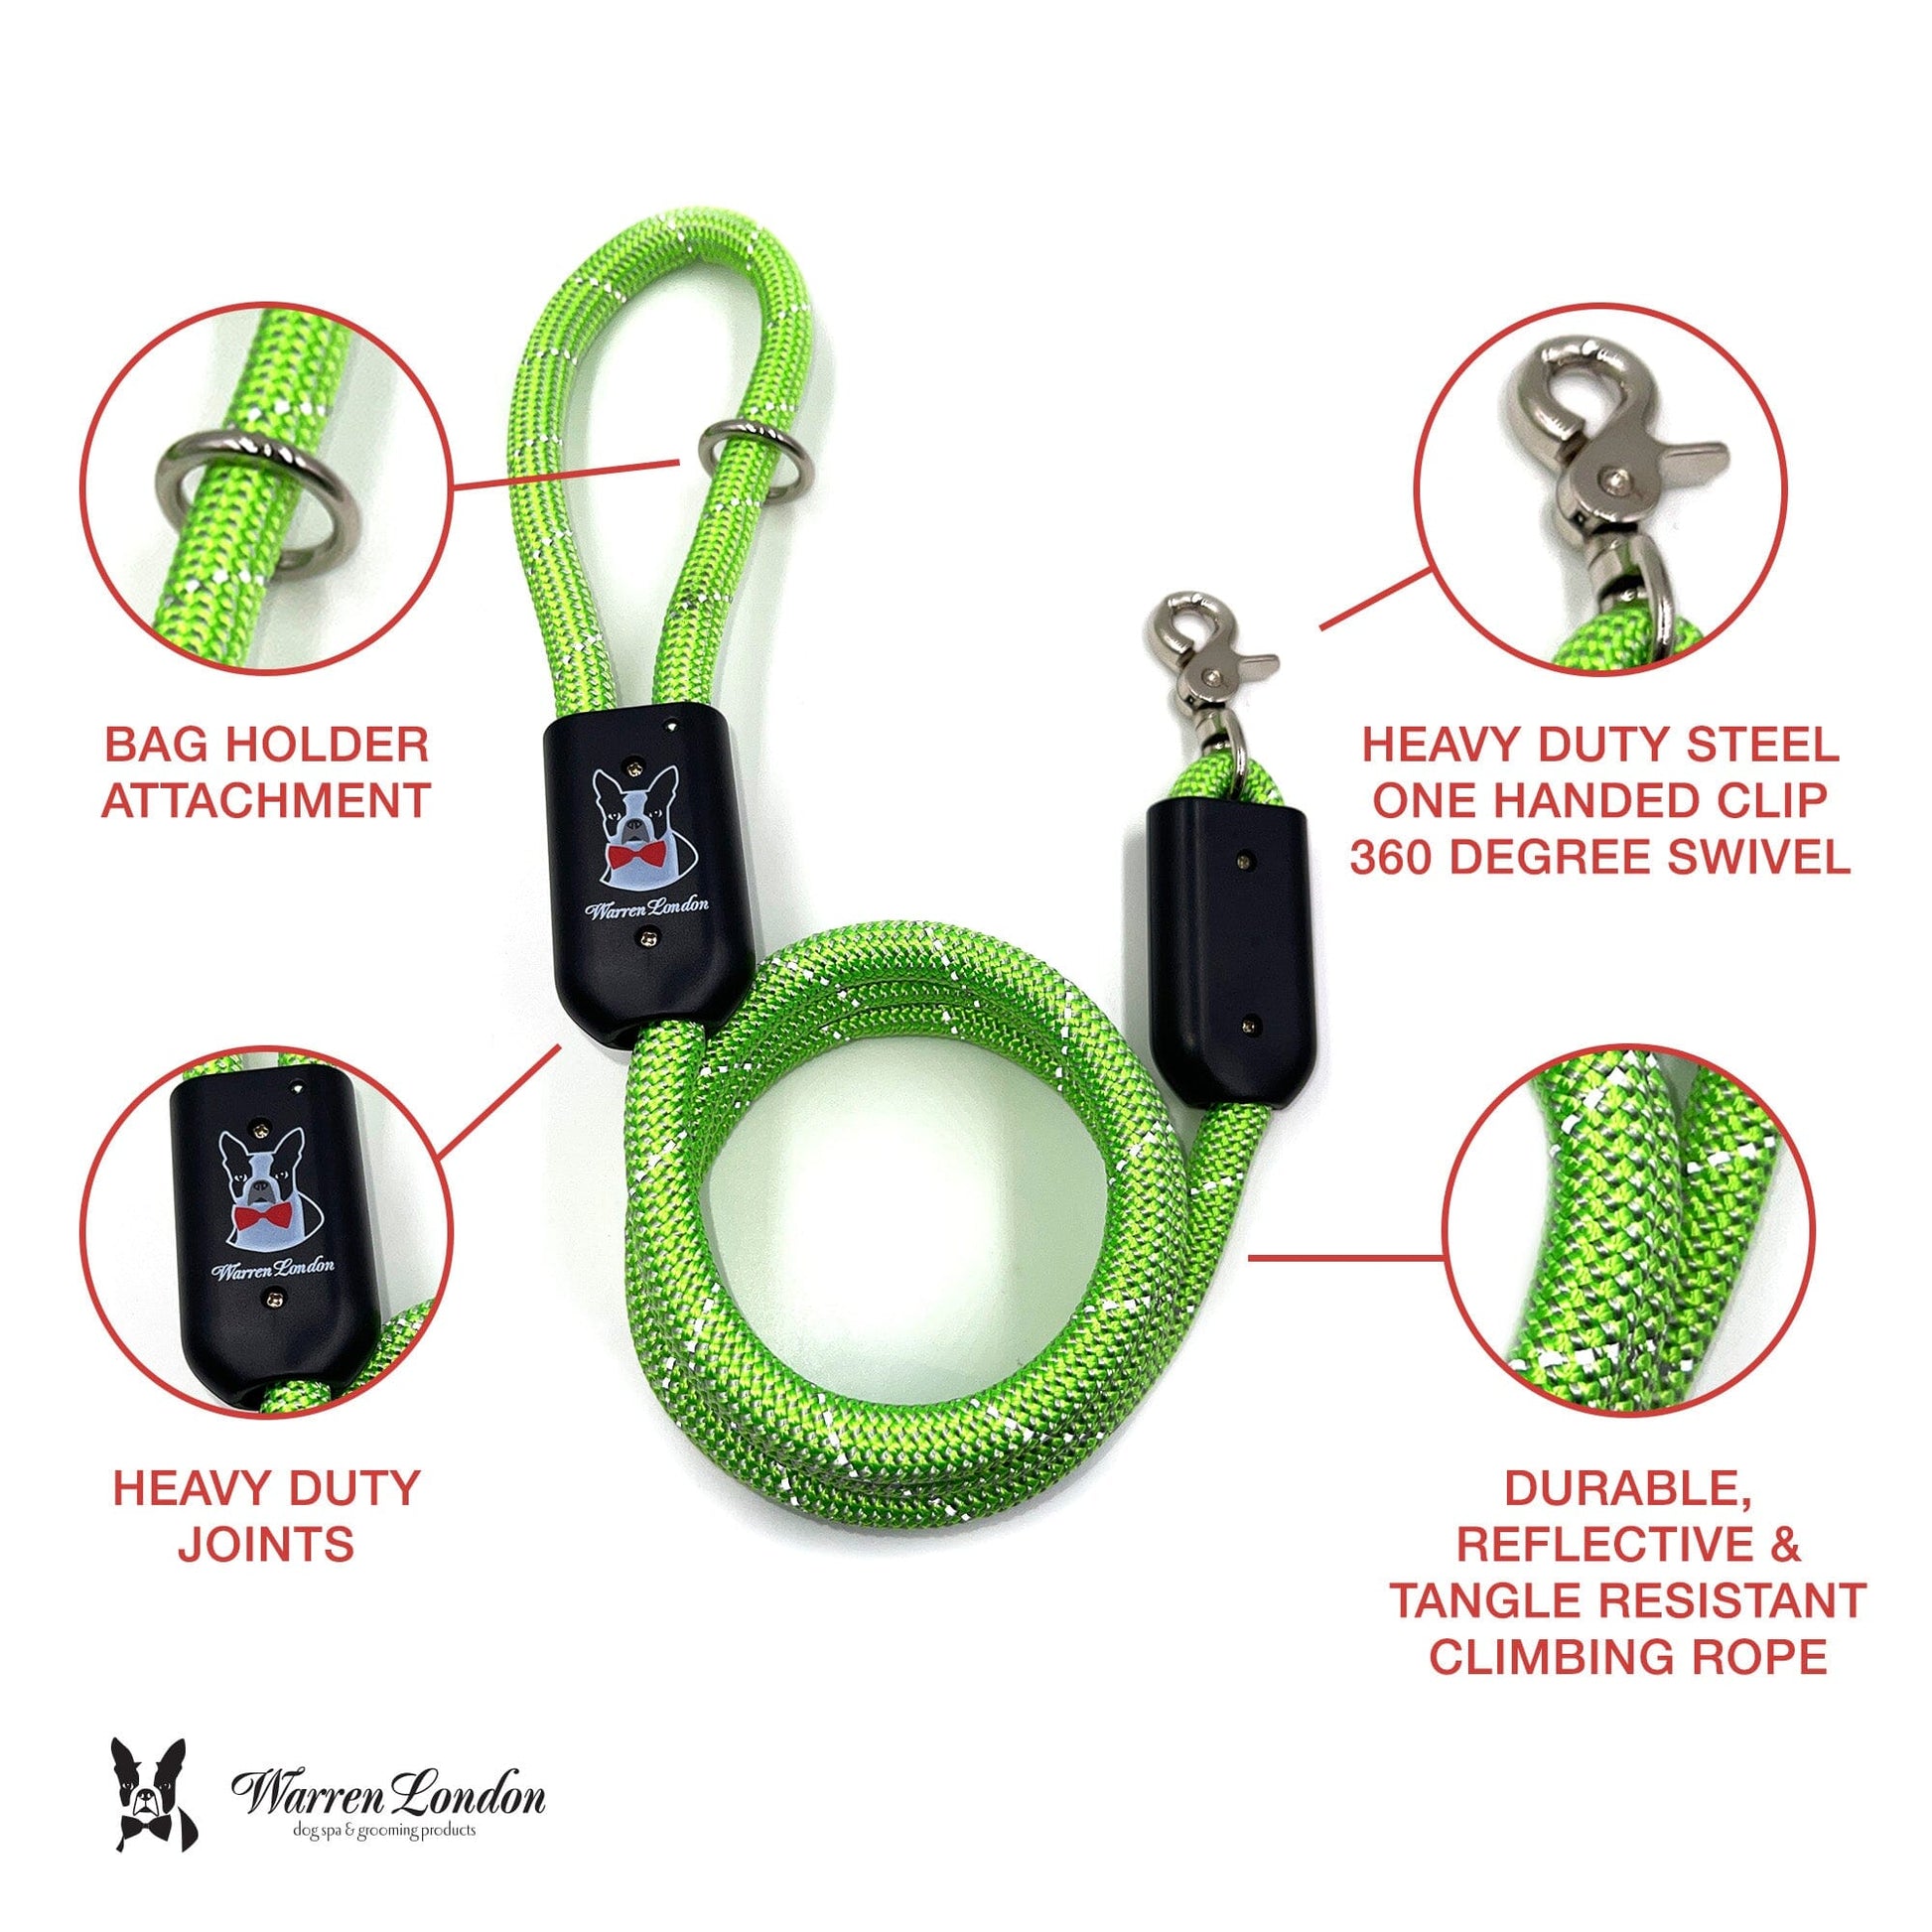 Rope Leash - Green Reflective Leashes, Collars & Accessories Warren London 